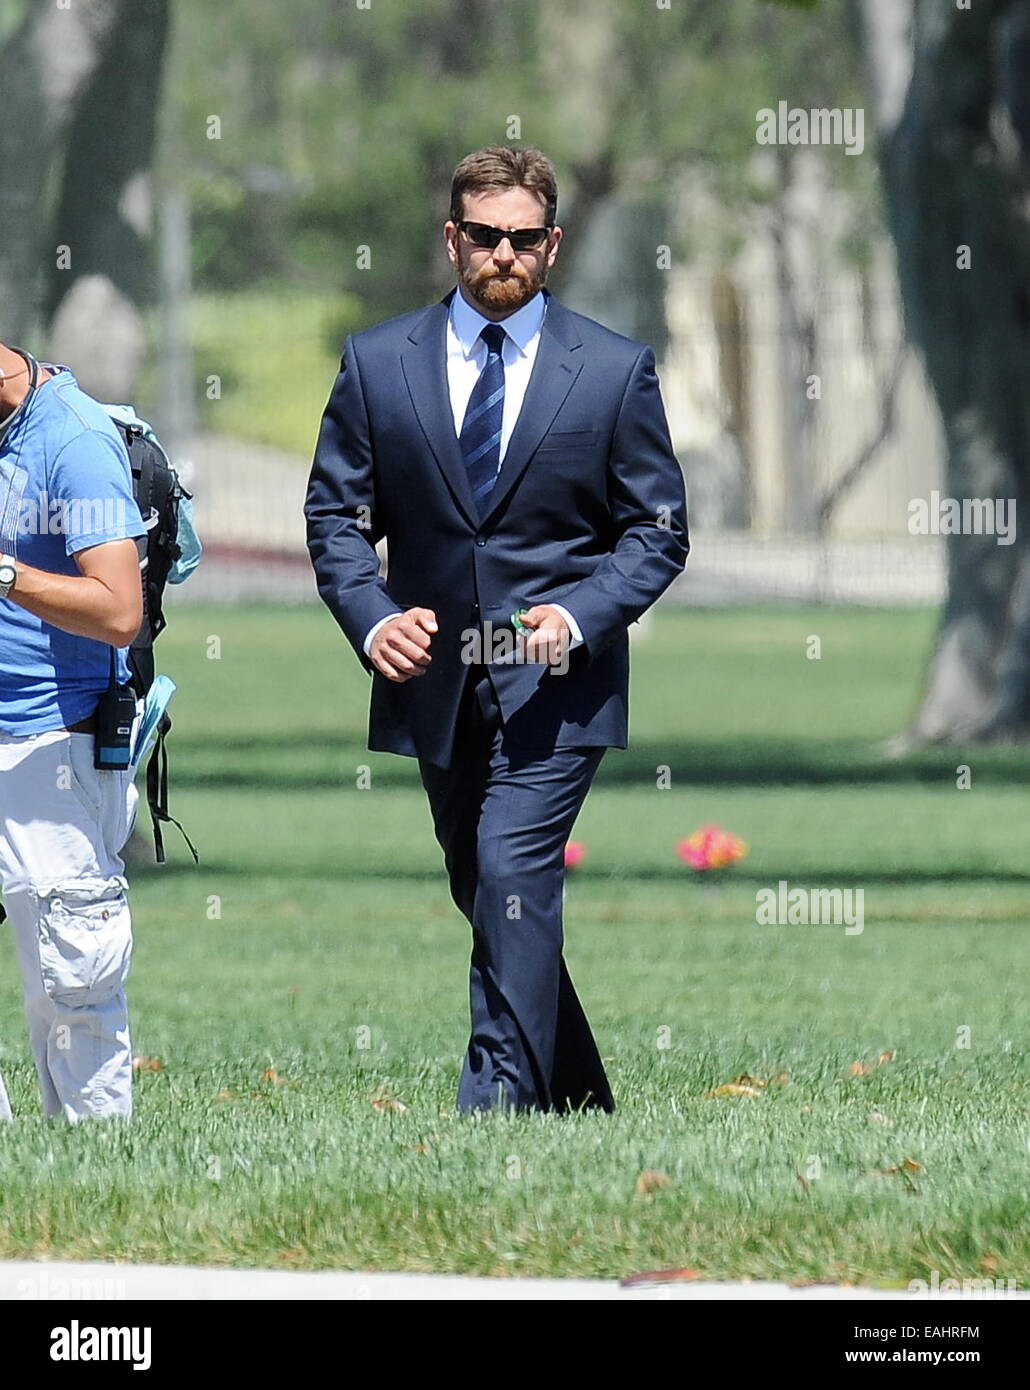 Actor Bradley Cooper puts on a suit for a funeral scene for his